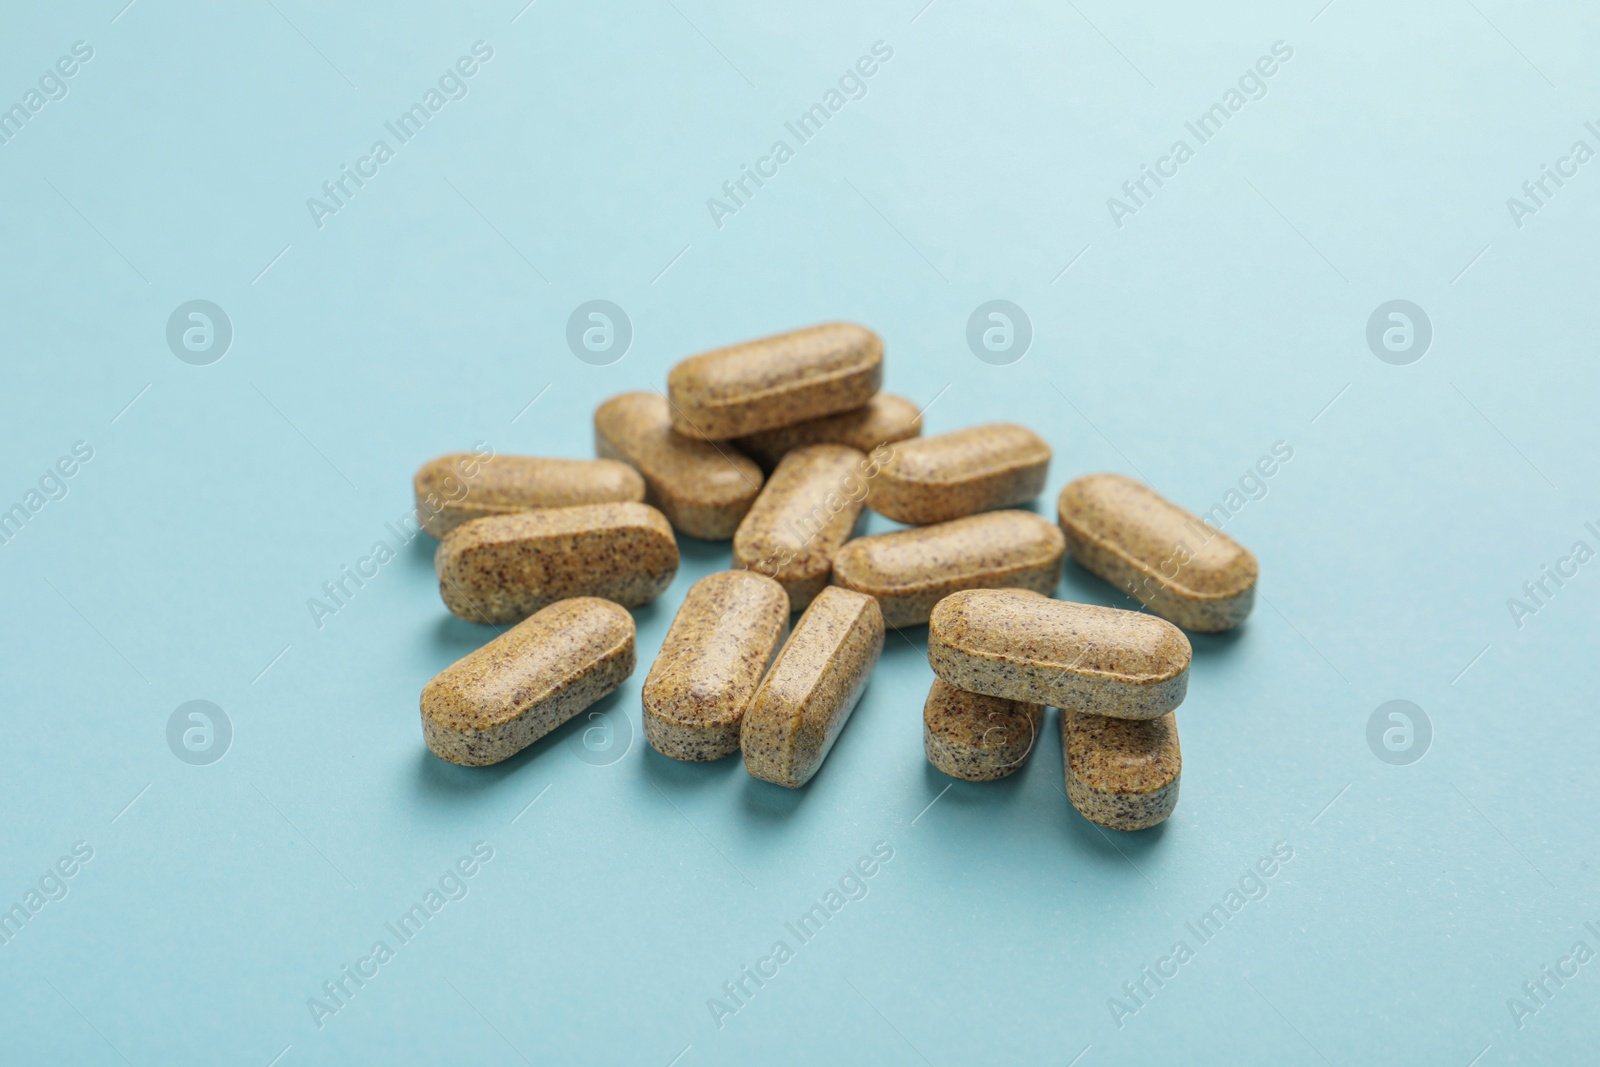 Photo of Dietary supplement pills on light blue background